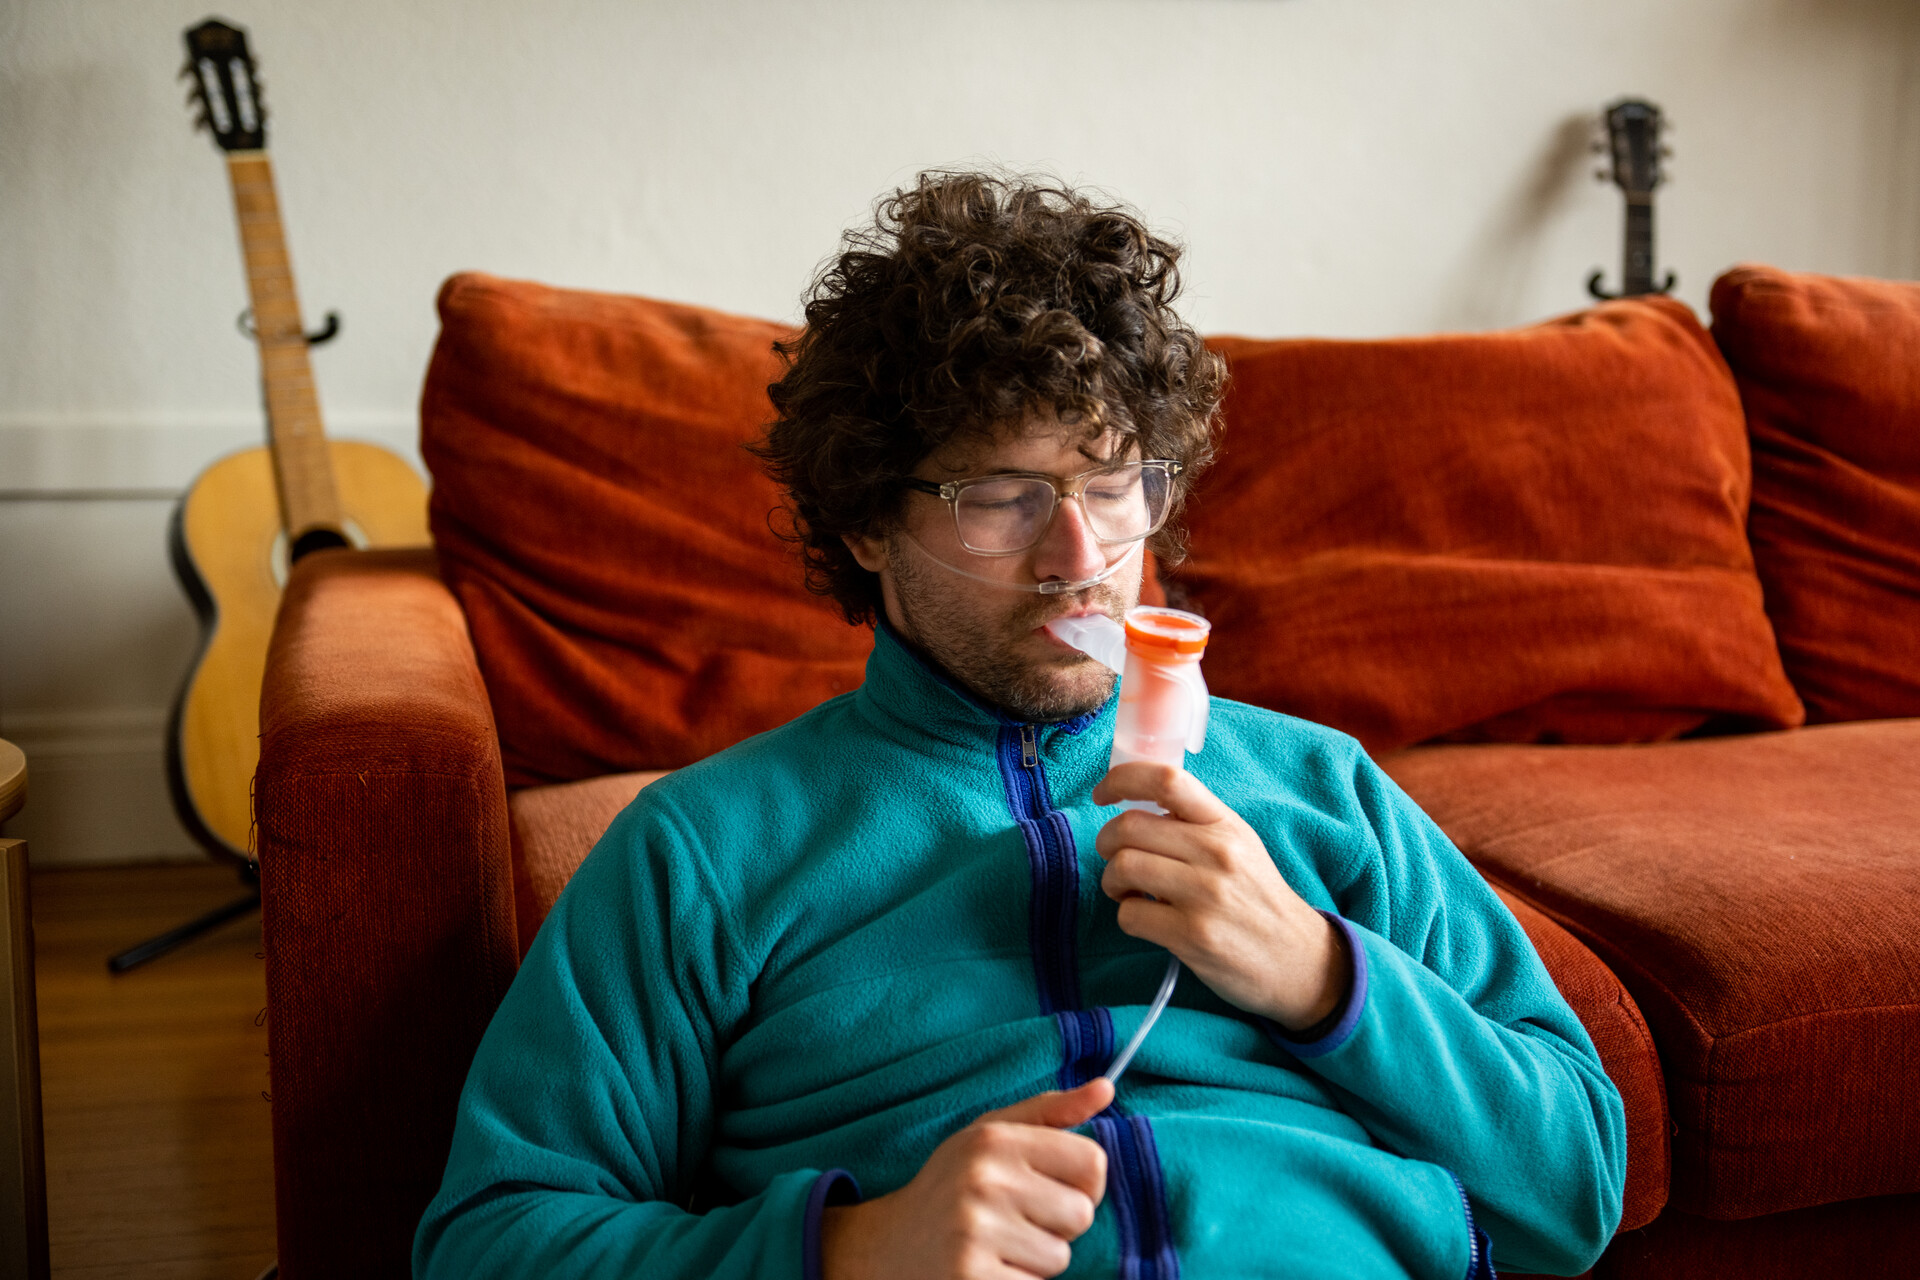 A white man with light brown curly hair and eyeglasses has a steam inhaler in his mouth as he laws reclines against a sofa in his living room.